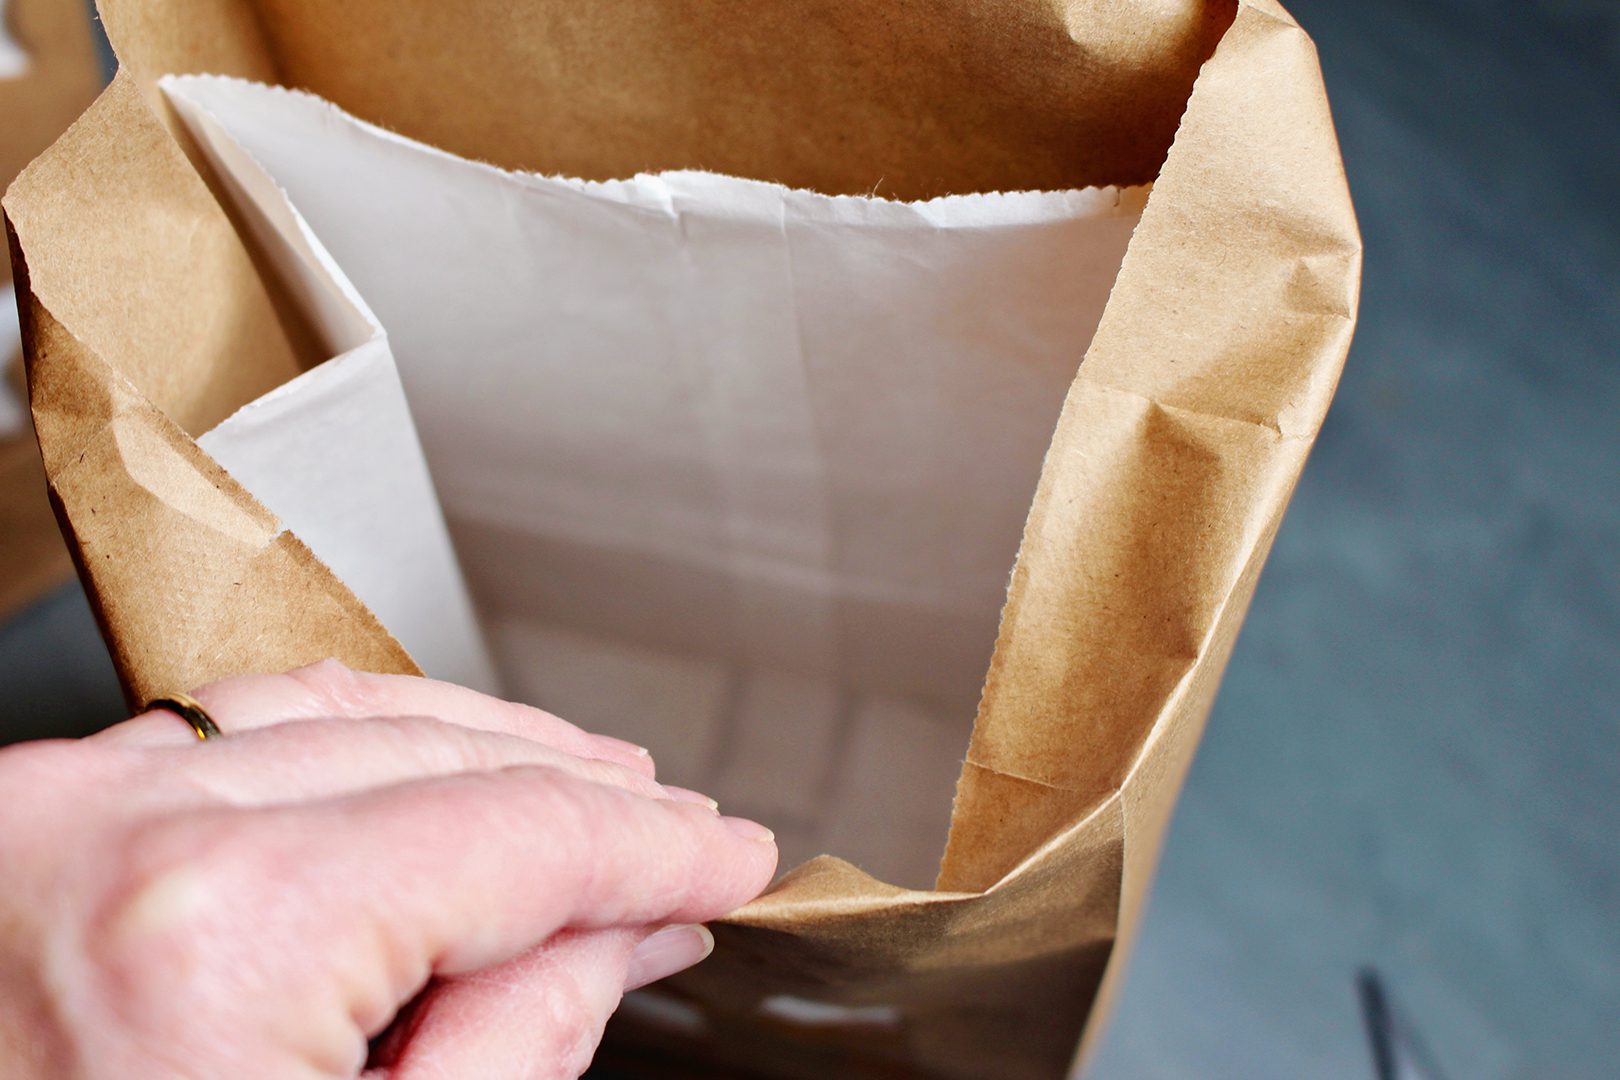 Folding over the edge of a brown paper bag with a white sandwich bag inside.